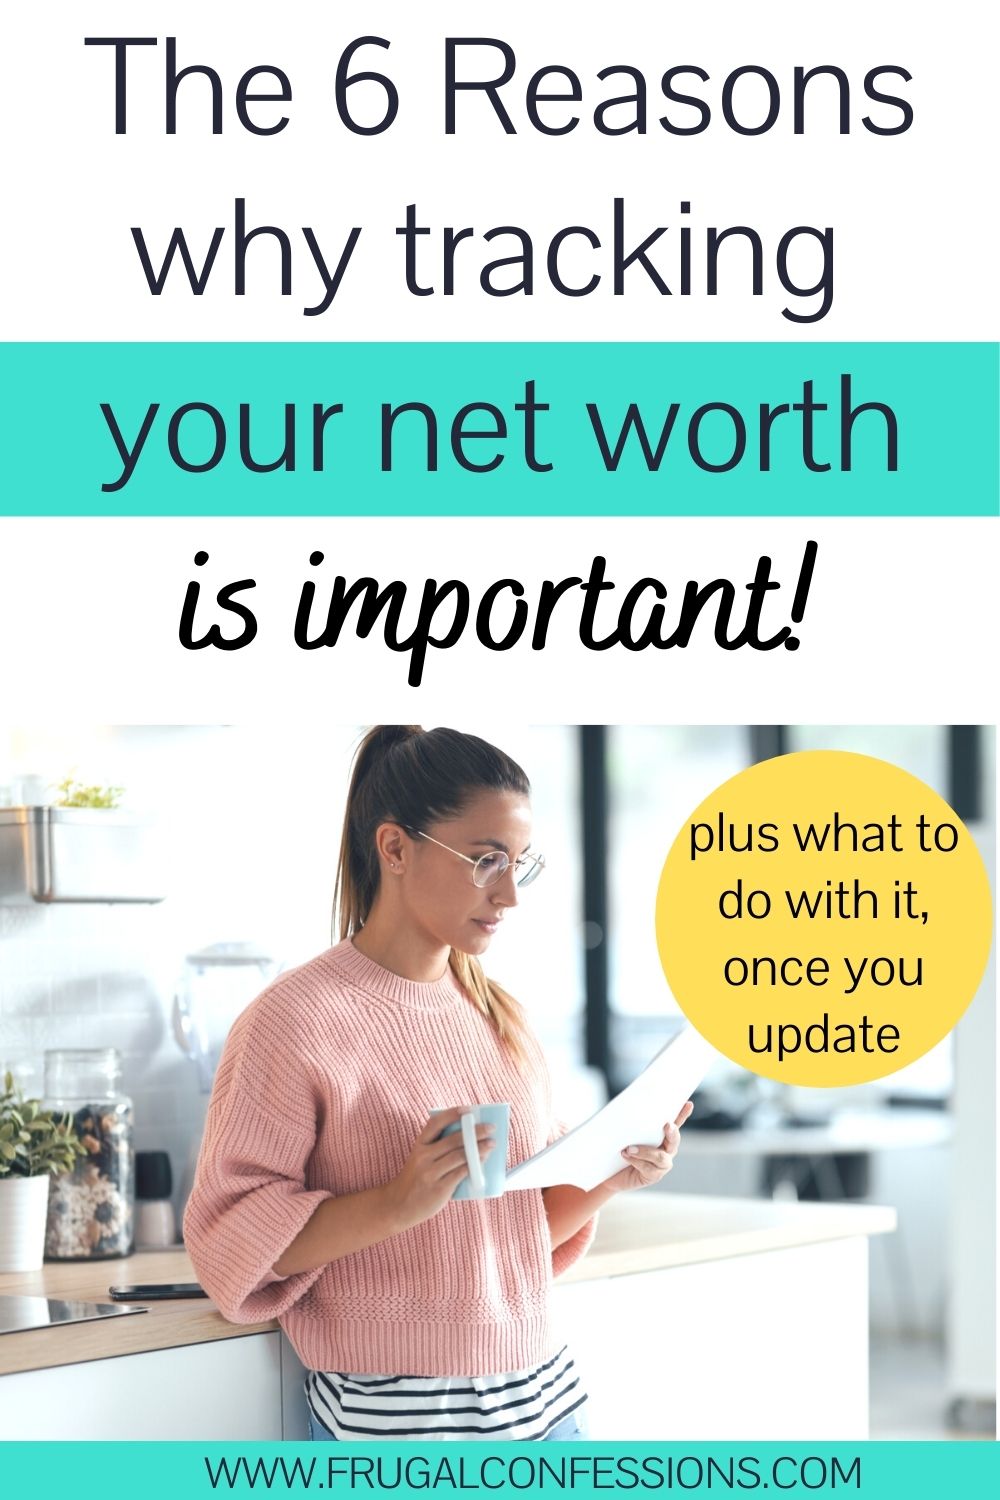 woman with glasses in pink sweater, looking over net worth, text overlay "the 6 reasons why tracking your net worth is important"